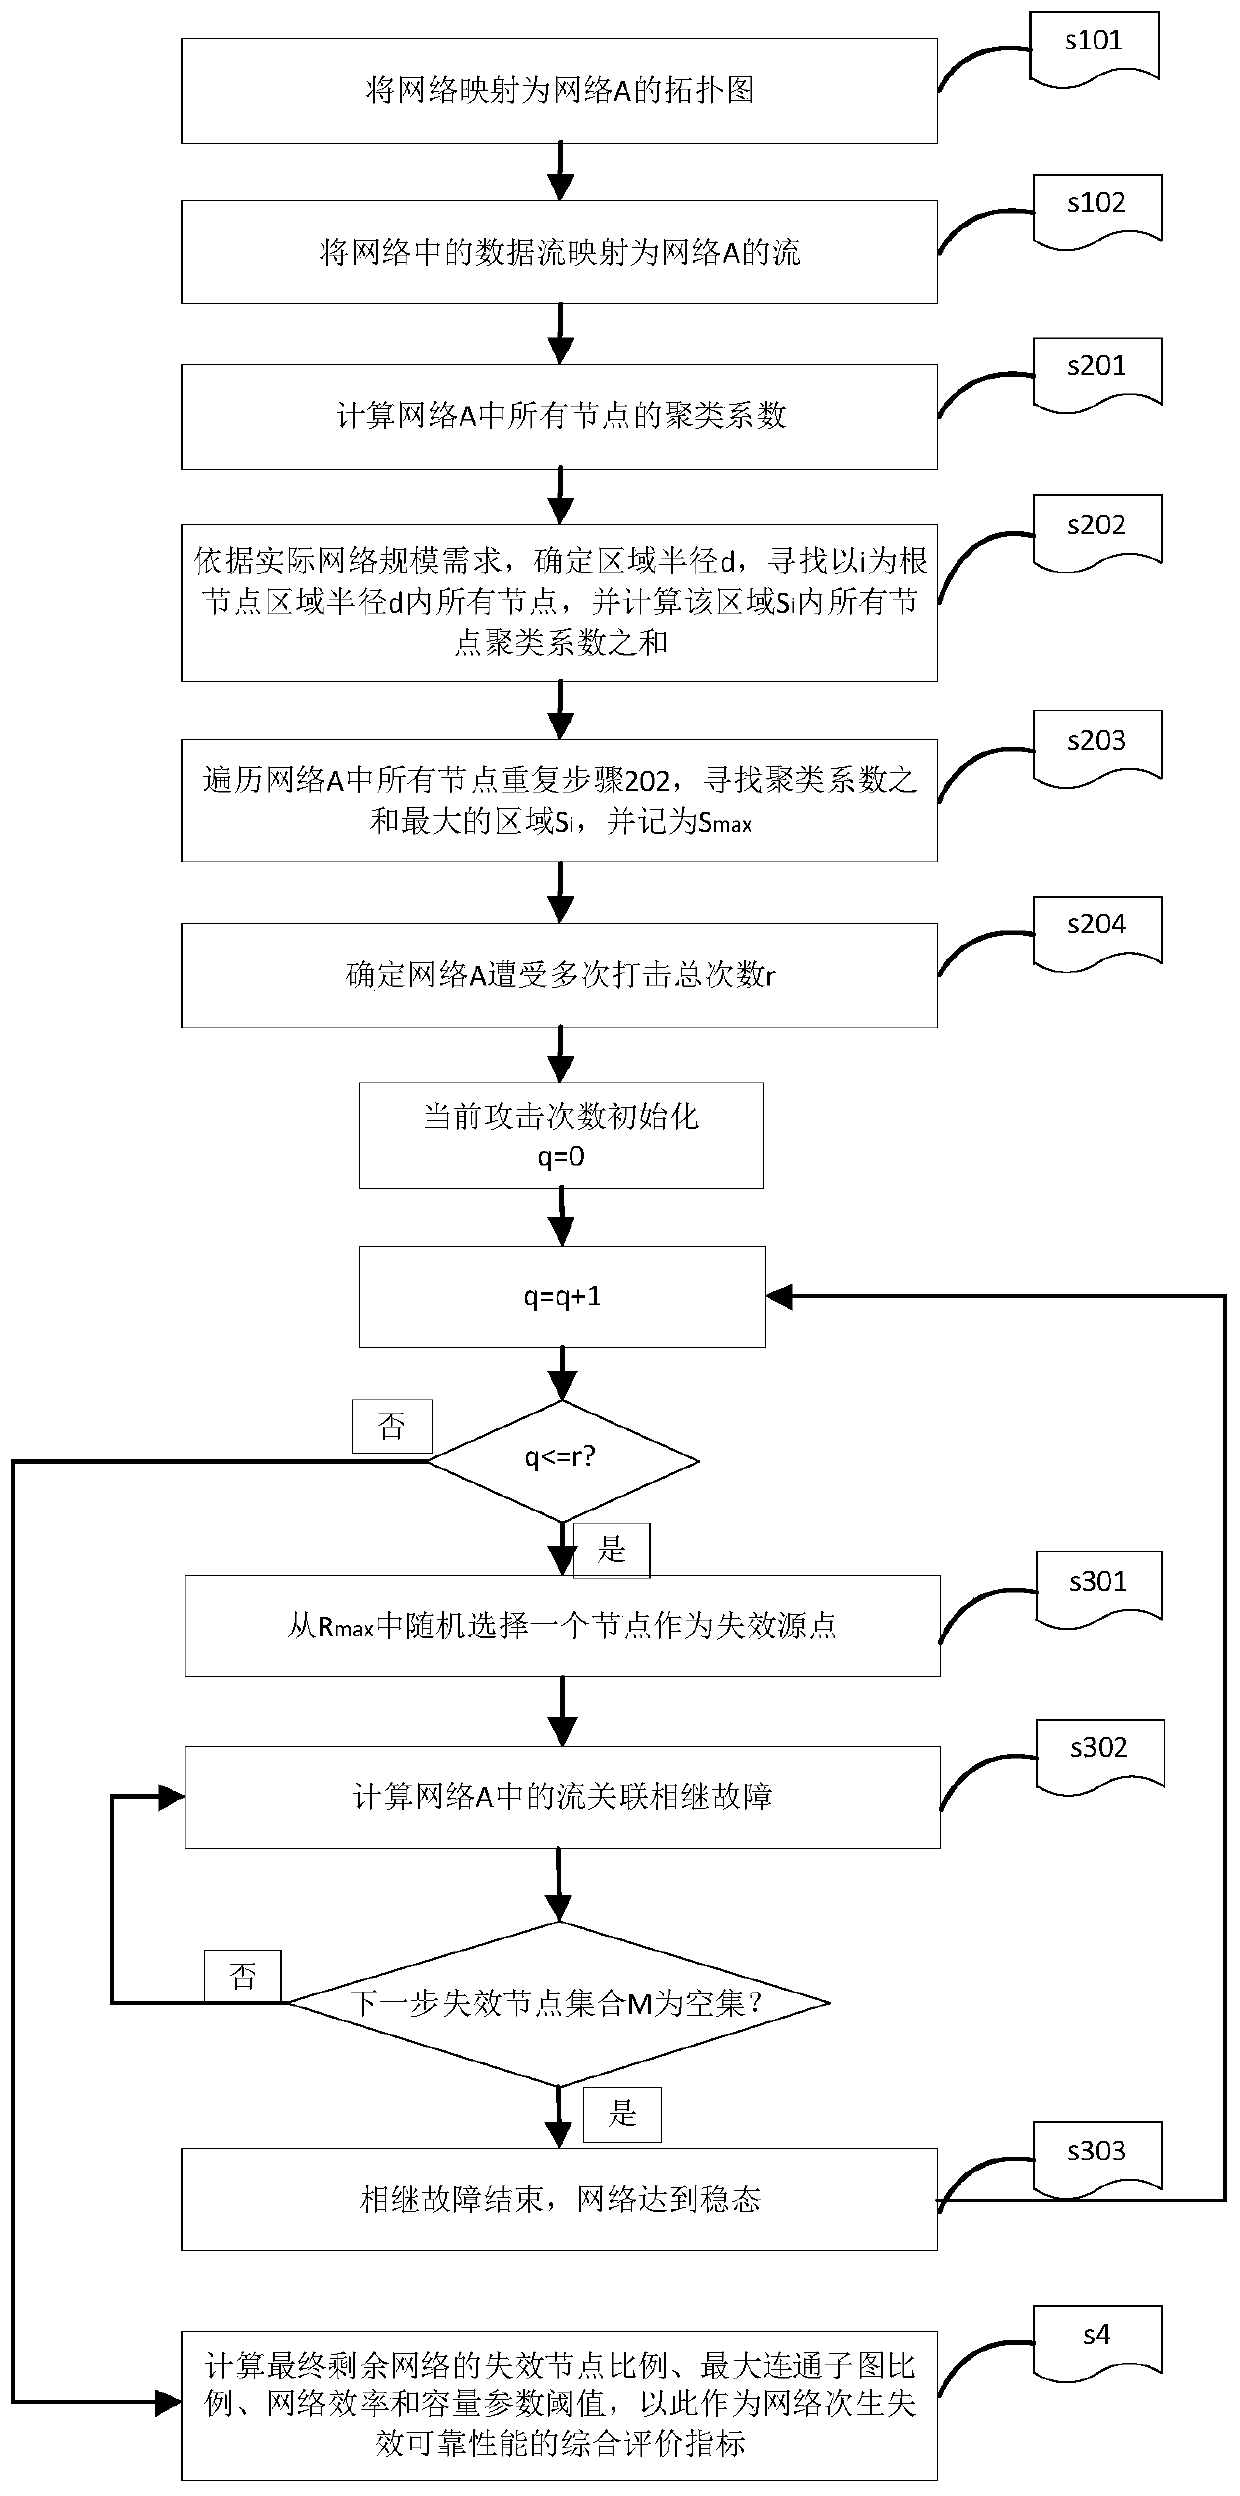 Secondary failure-oriented network reliability evaluation method